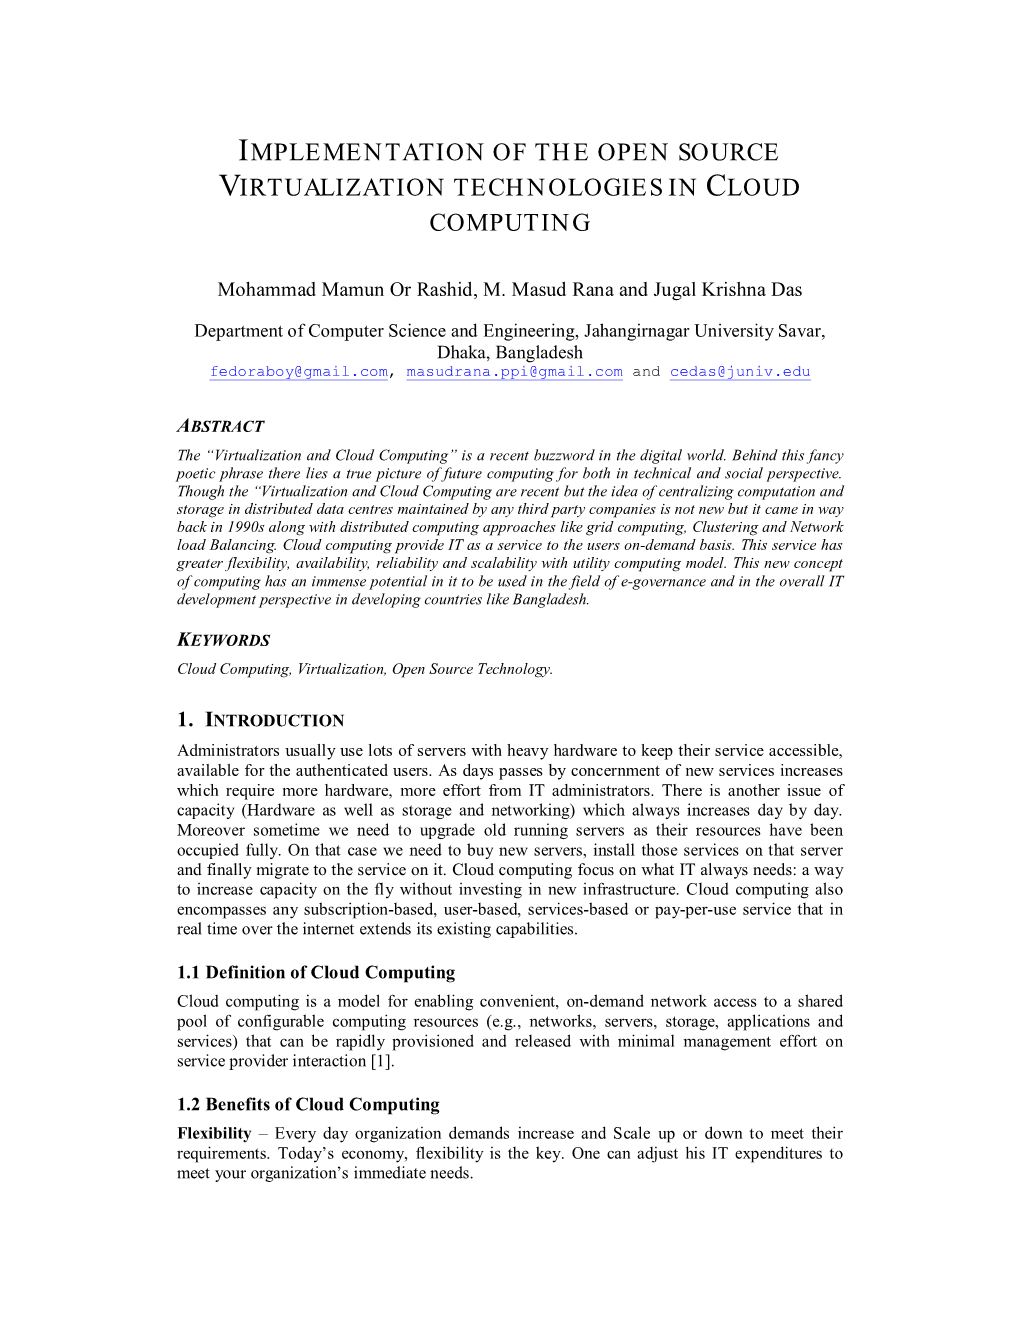 Implementation of the Open Source Virtualization Technologies in Cloud Computing